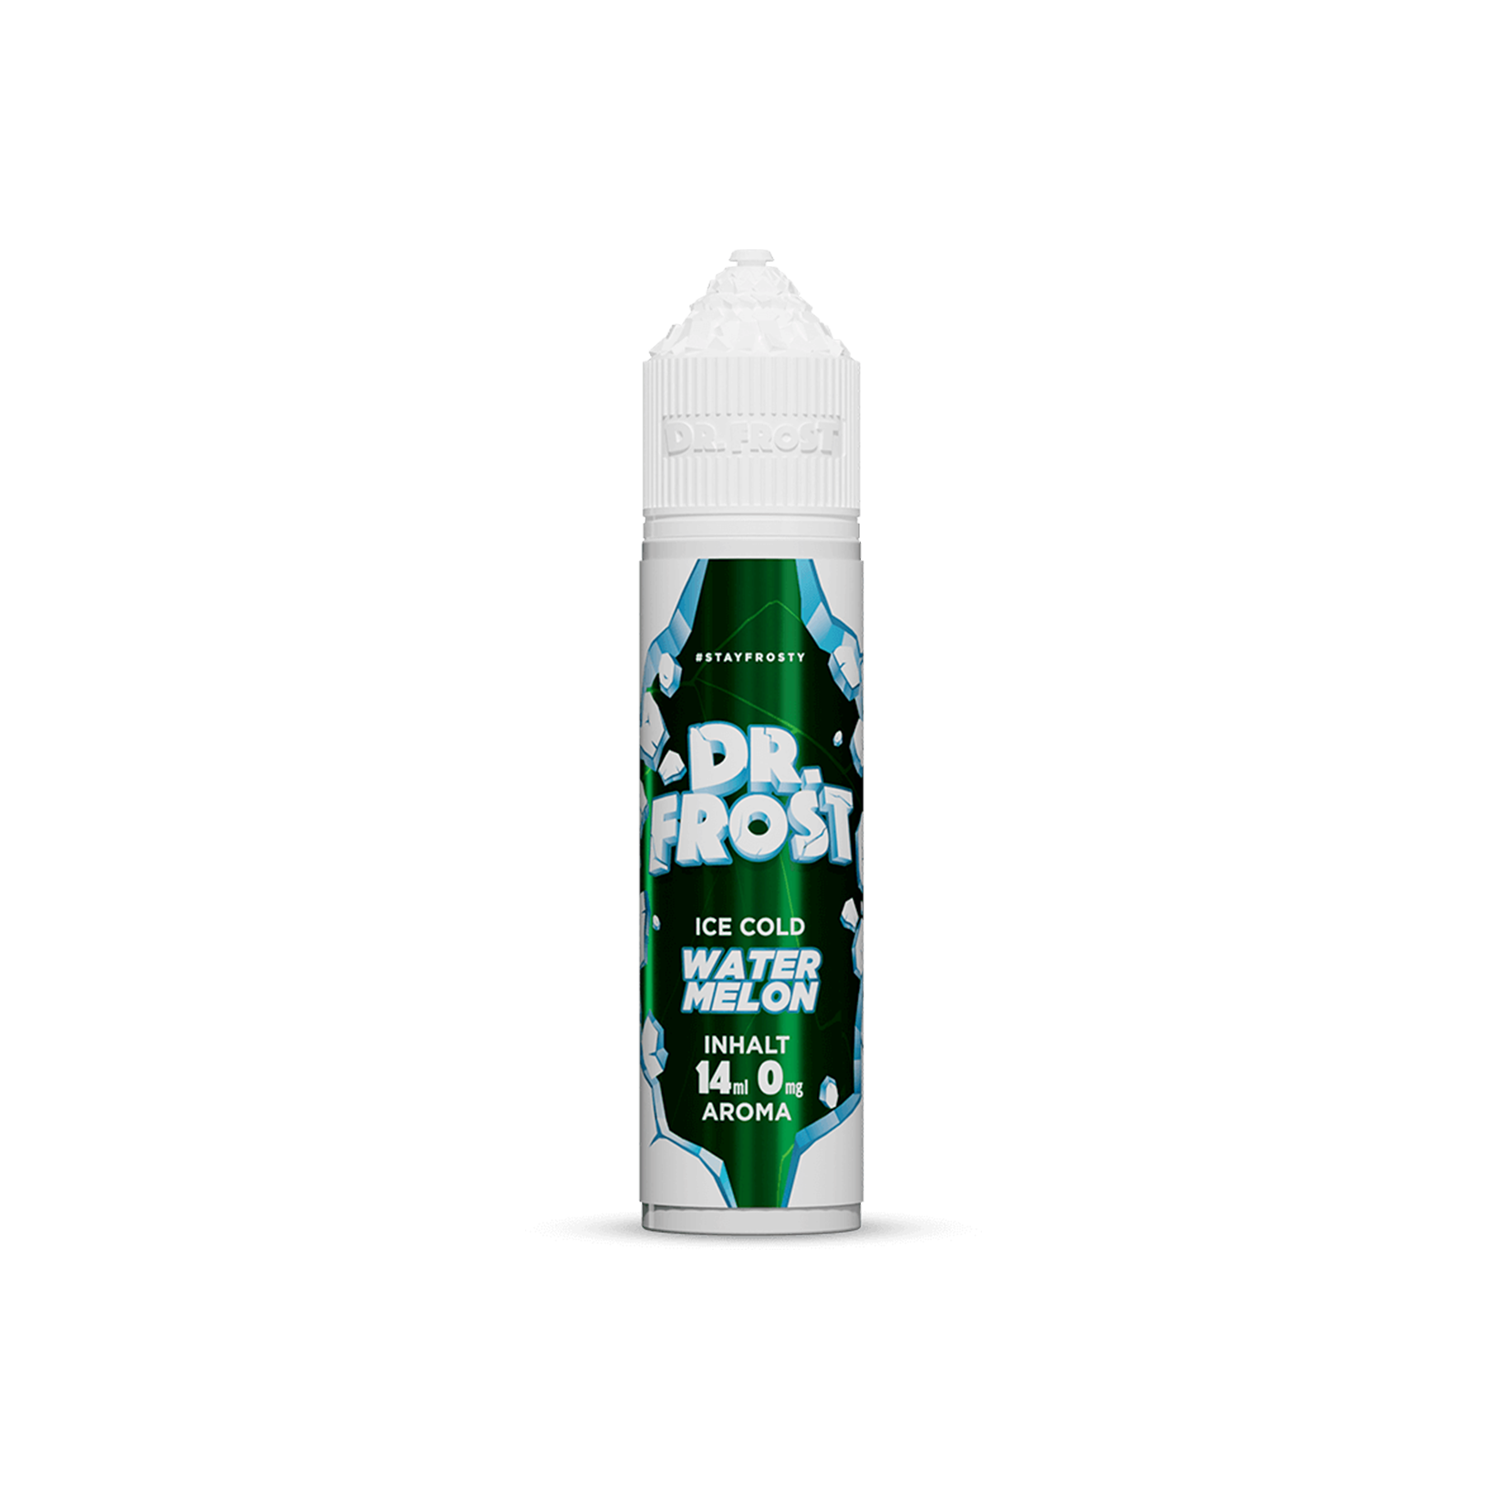 Dr. Frost - Ice Cold - Watermelon 14ml Aroma